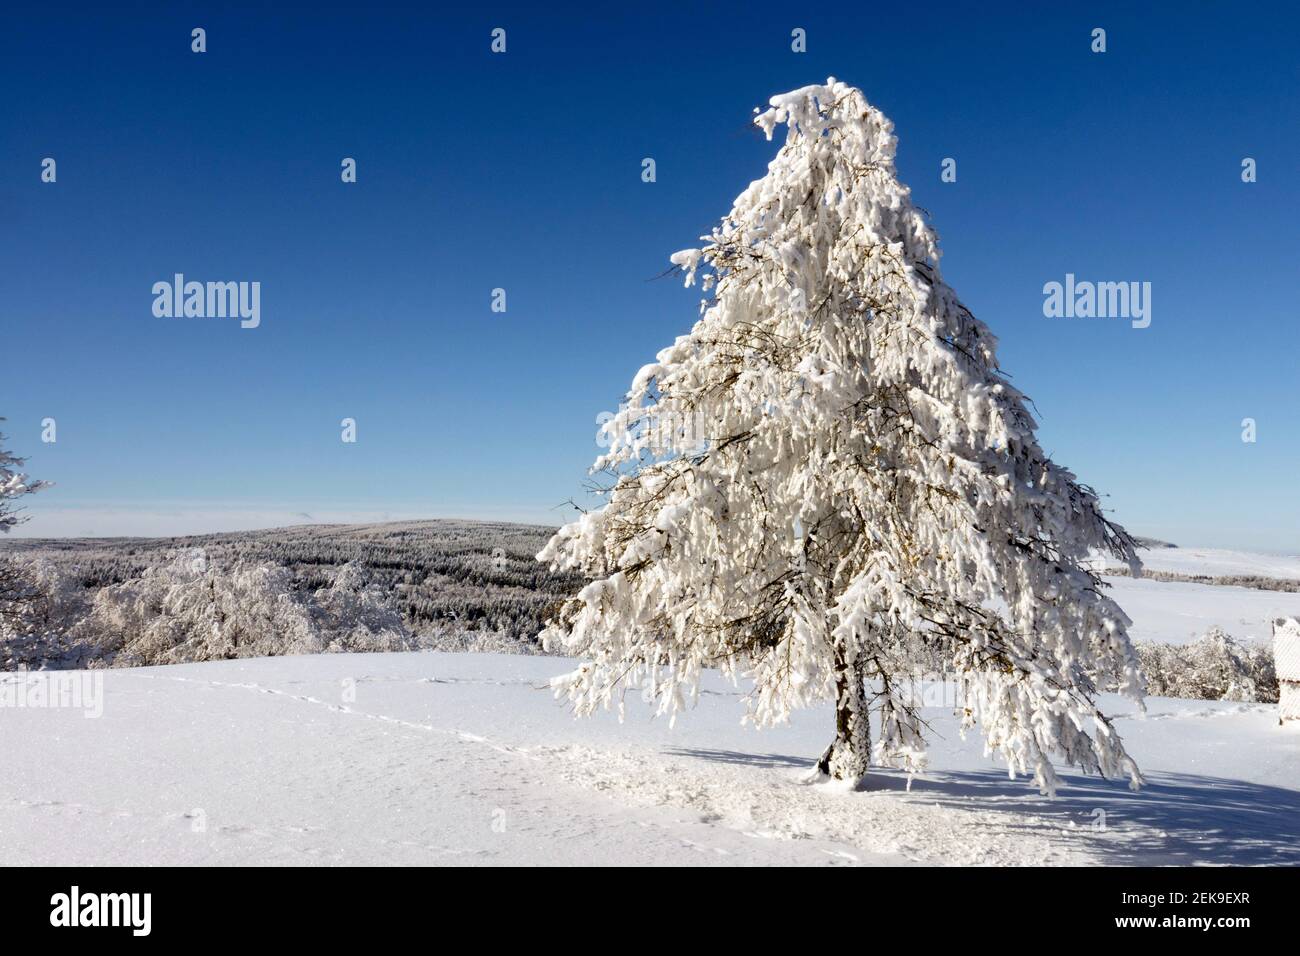 Snow-covered scenic landscape Snowy tree Czech winter snow mountains, snow mountain blue sky Stock Photo